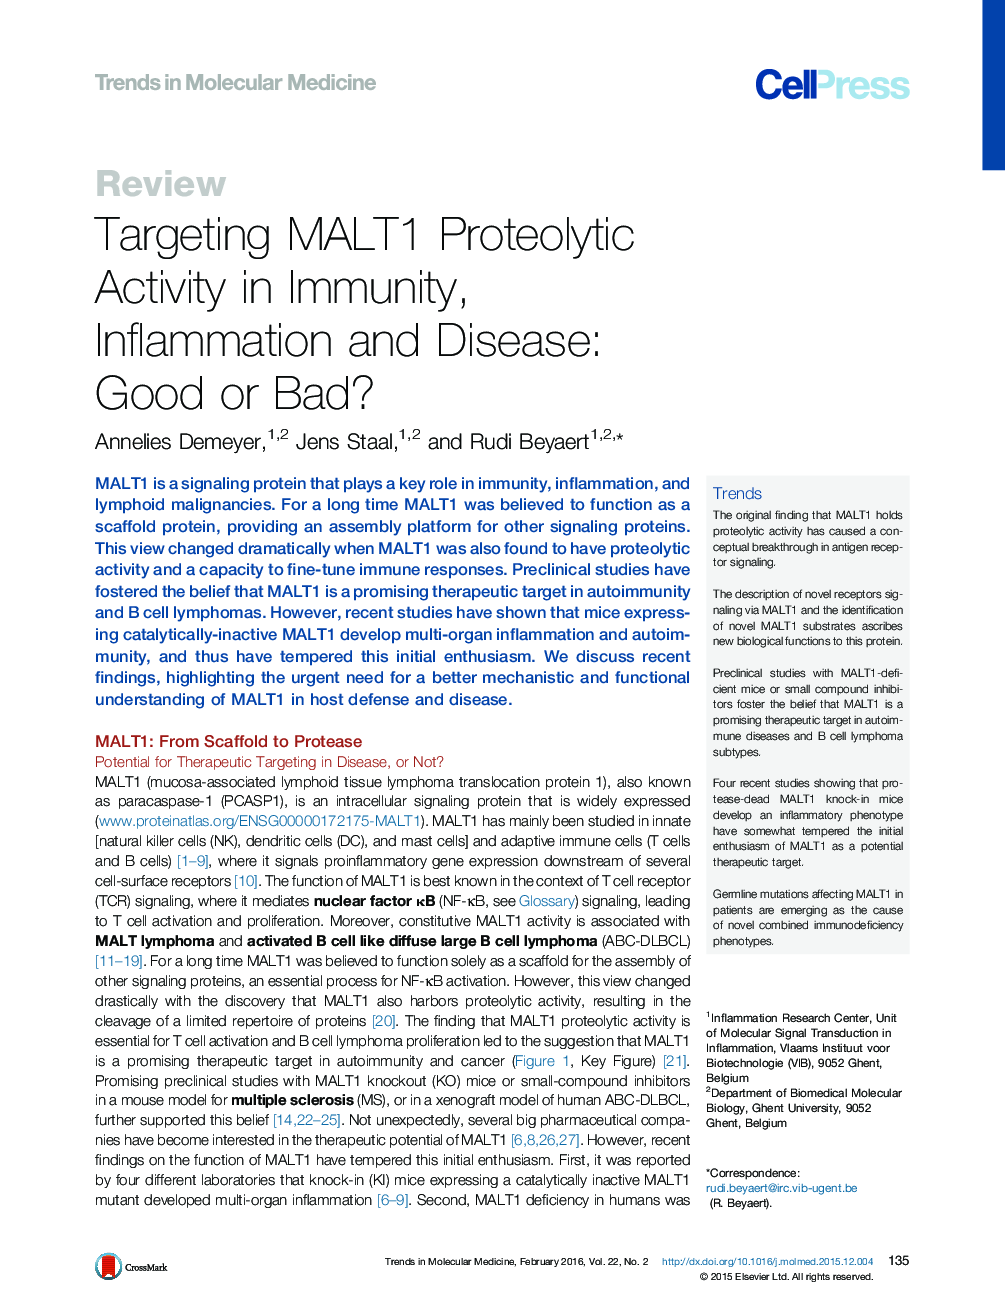 Targeting MALT1 Proteolytic Activity in Immunity, Inflammation and Disease: Good or Bad?